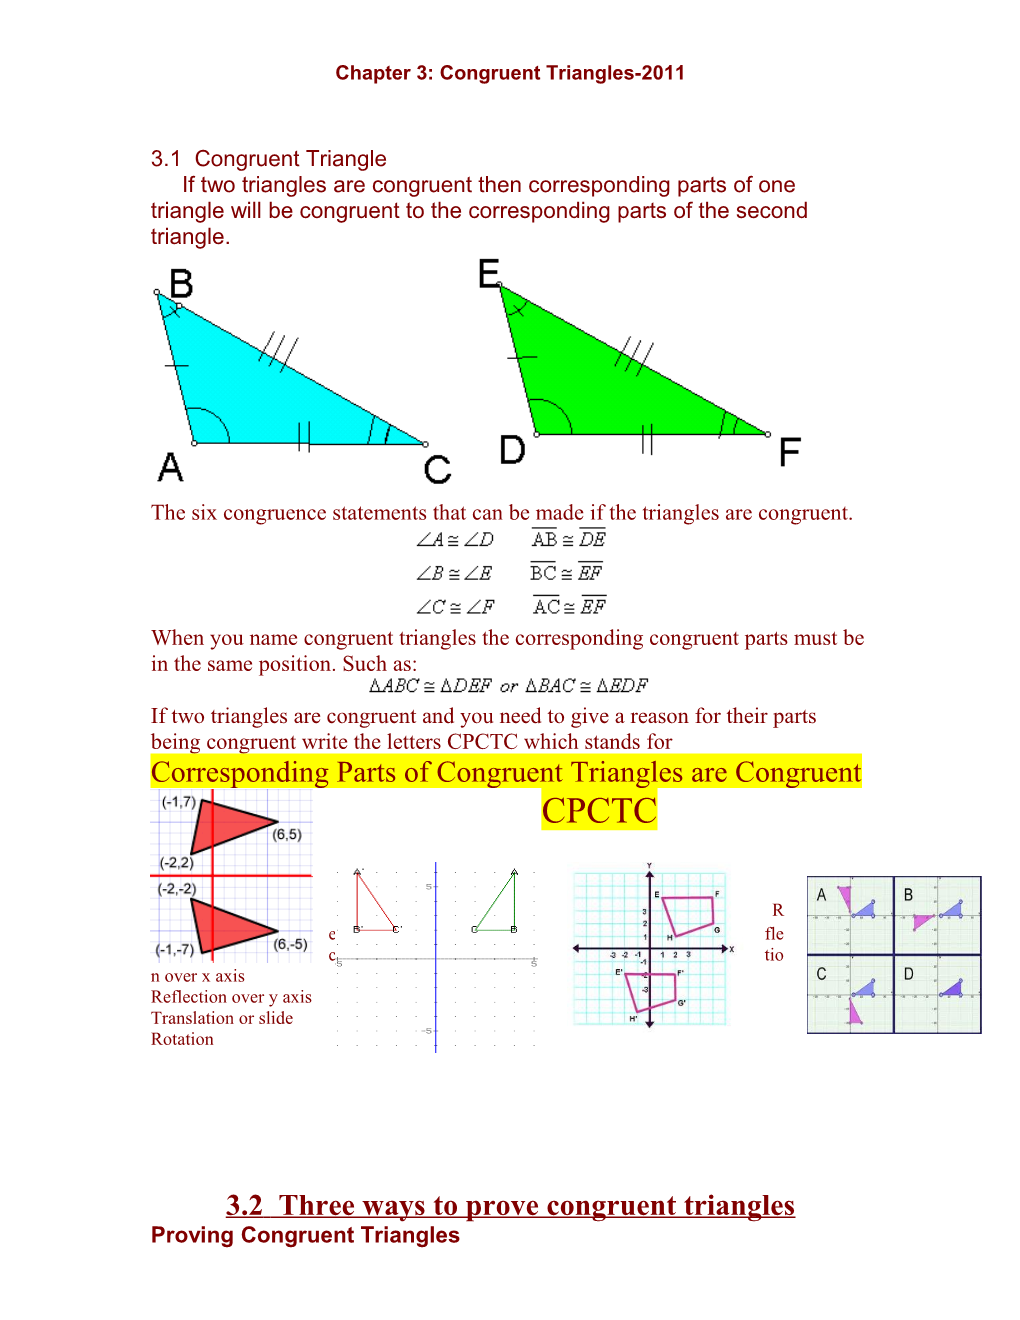 Chapter 3: Congruent Triangles-2000